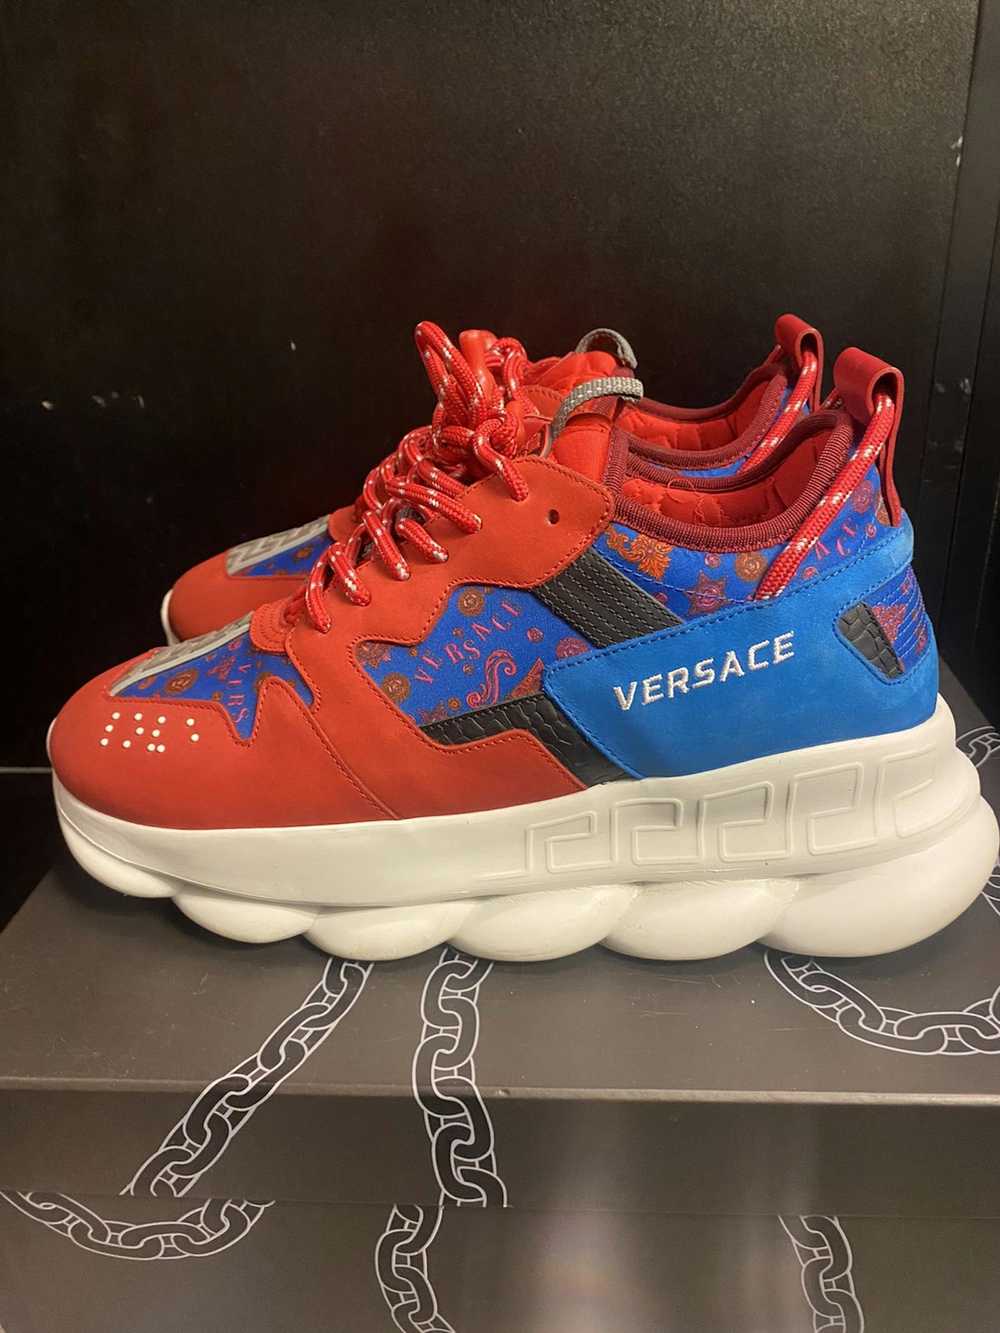 Versace Versace chain reaction pre owned size 11 … - image 5